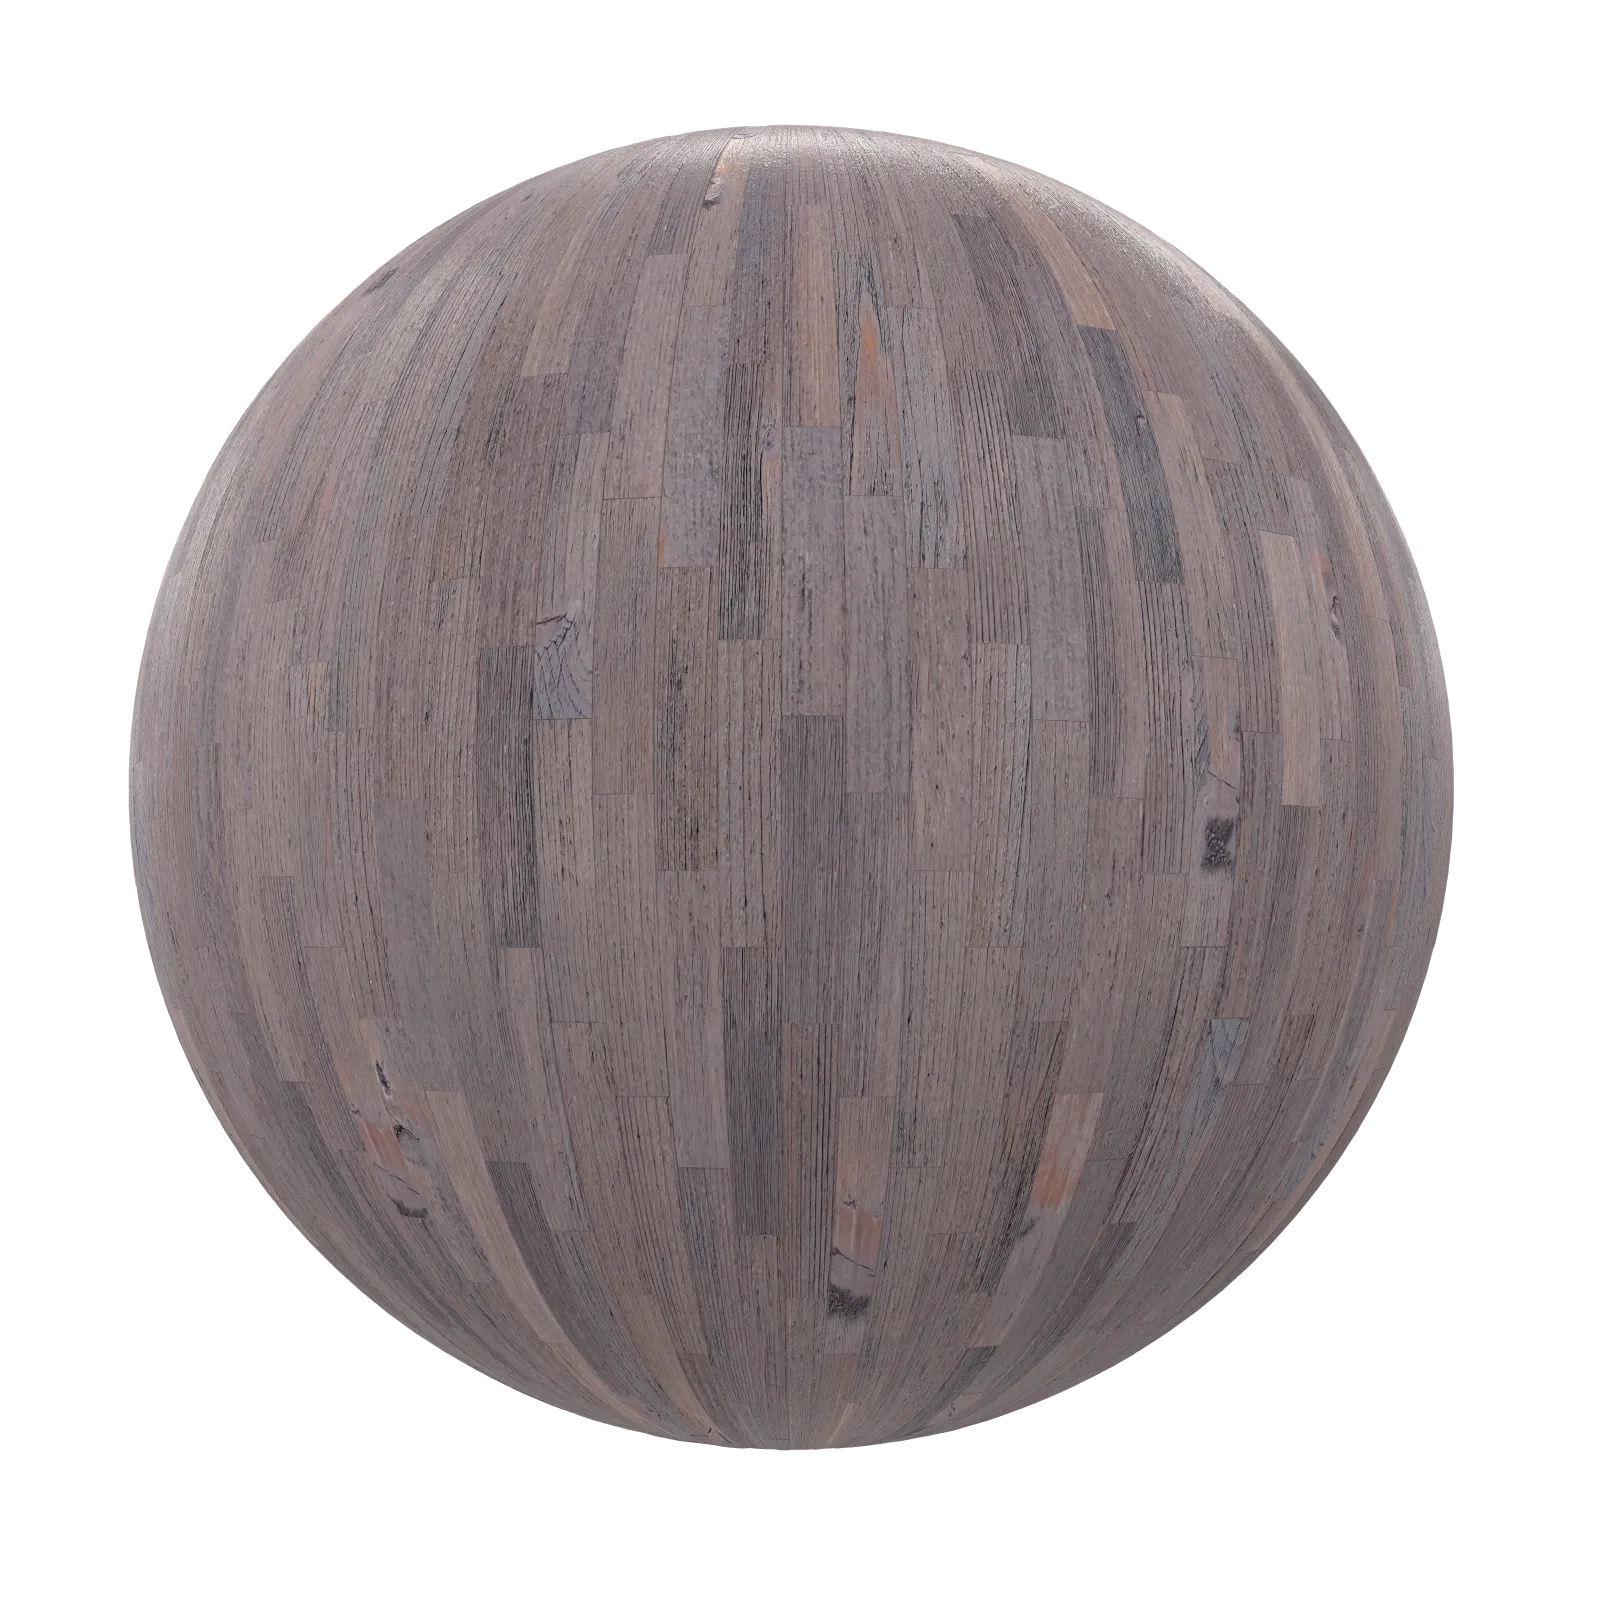 TEXTURES – WOOD – Old Wood Tiles 13